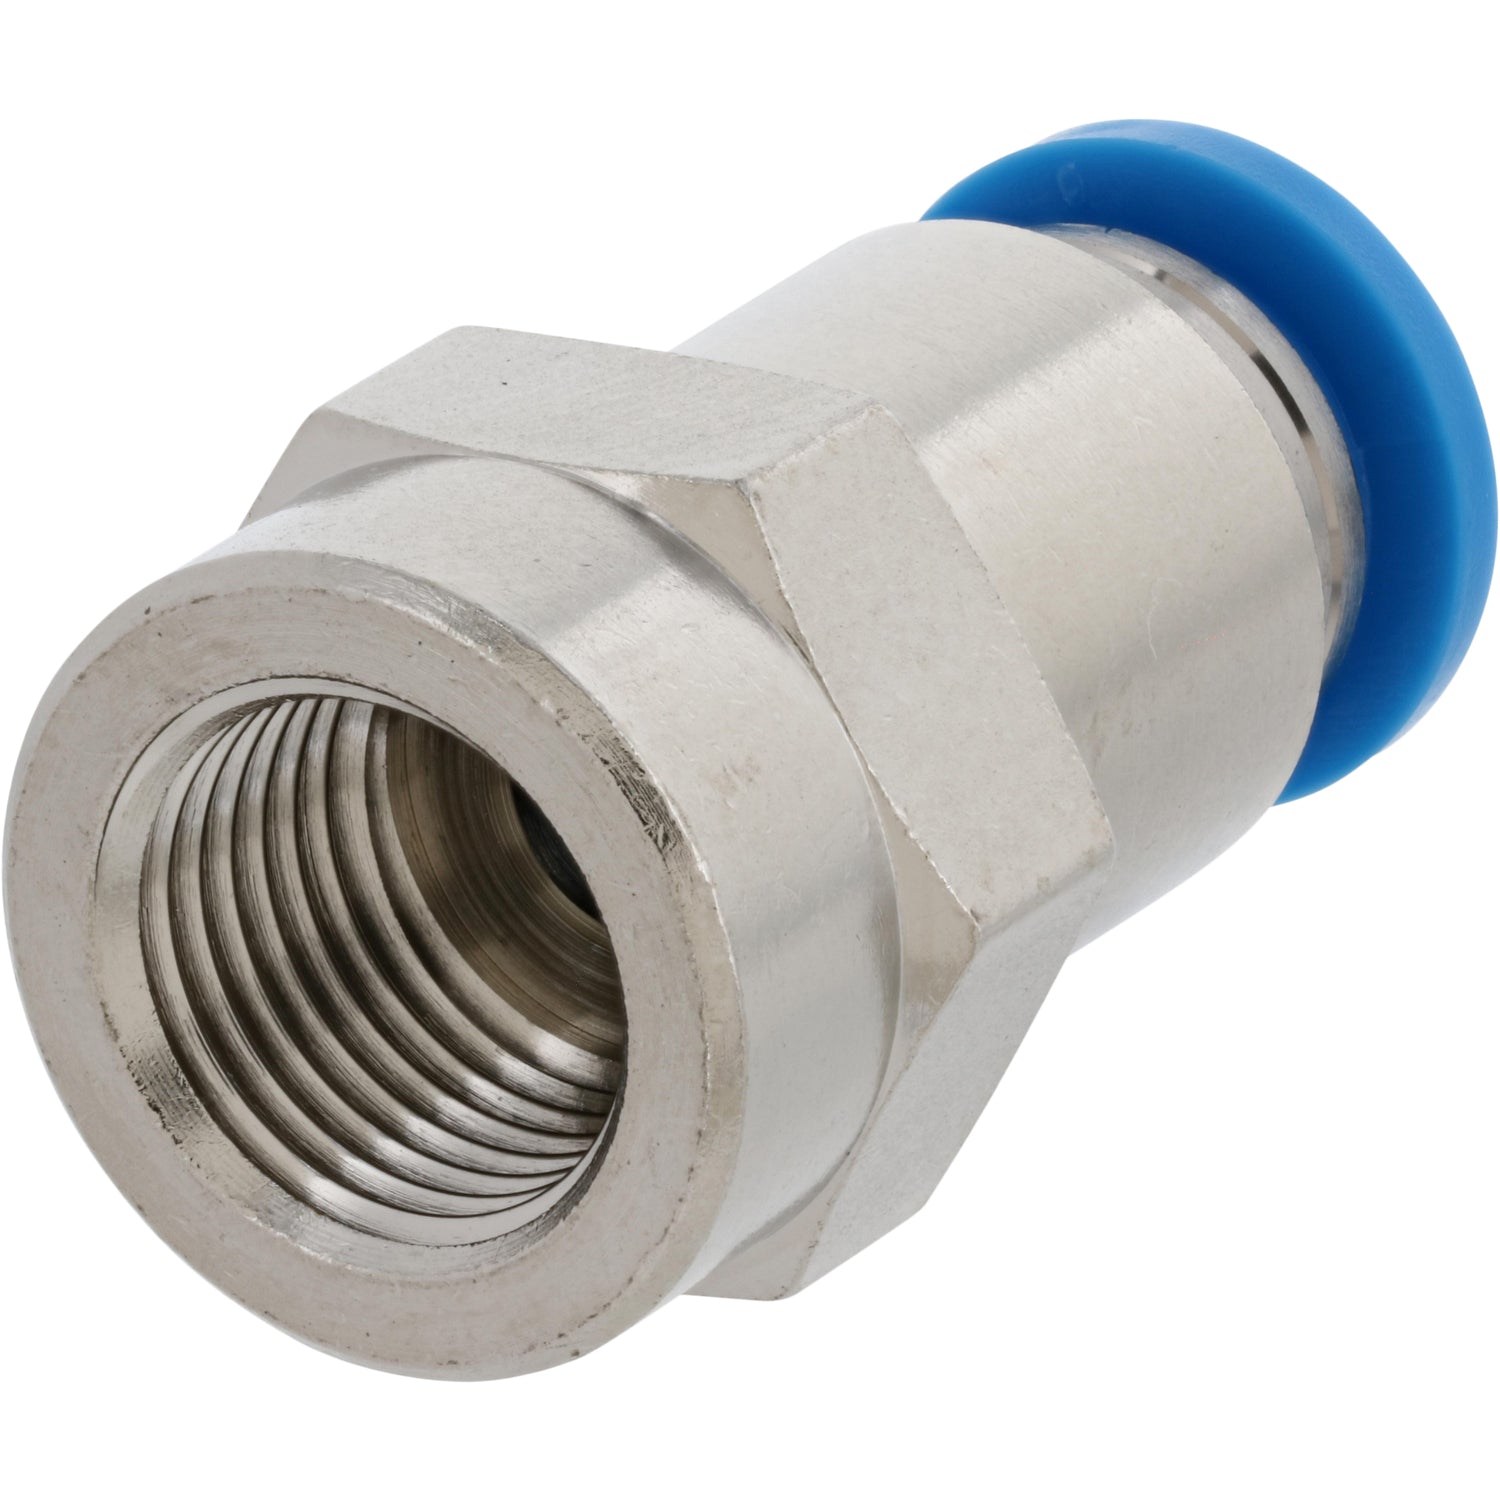 Push-in Fitting with blue press connect collar and exposed threads. Part shown on white background.